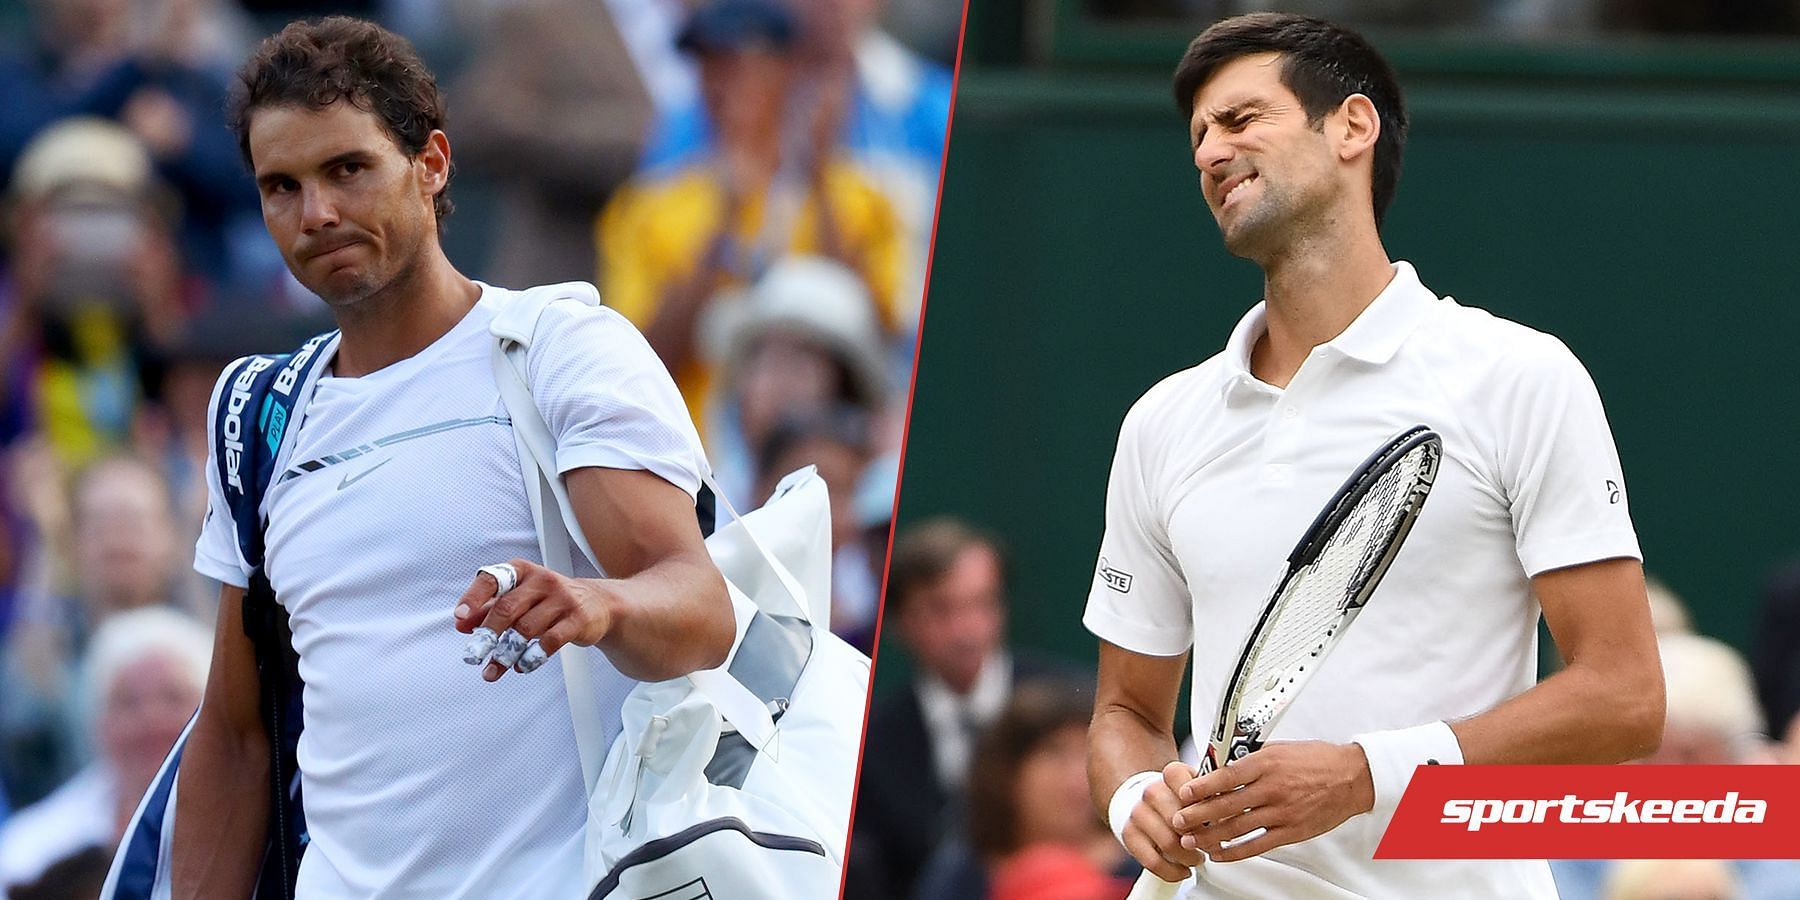 Rafael Nadal and Novak Djokovic would have been higher in the ATP rankings if ranking points were awarded at Wimbledon